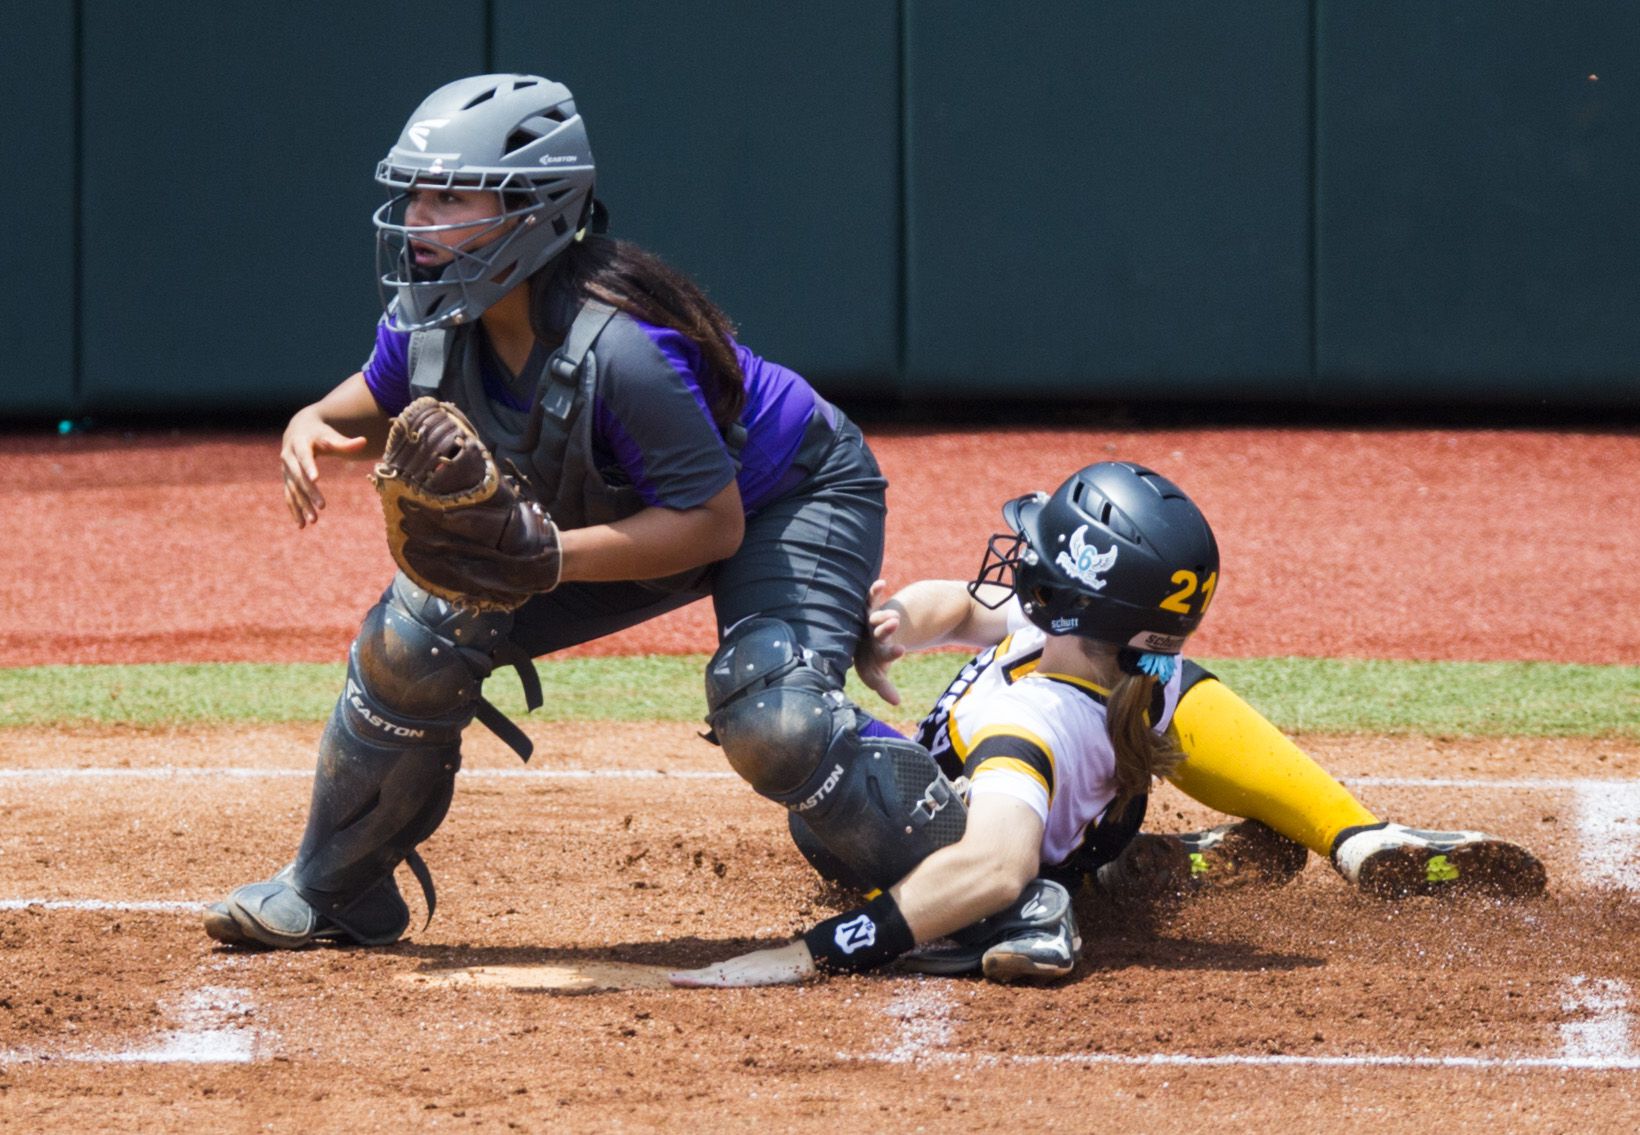 Forney's Charlie Hale (21) slides in to home for a run and collides with Angleton catcher Mika Hinojosa (13) during the second inning of a UIL Class 5A state semifinal softball game between Forney and Angleton on Friday, May 31, 2019 at Red & Charline McCombs Field at the University of Texas in Austin. (Ashley Landis/The Dallas Morning News)